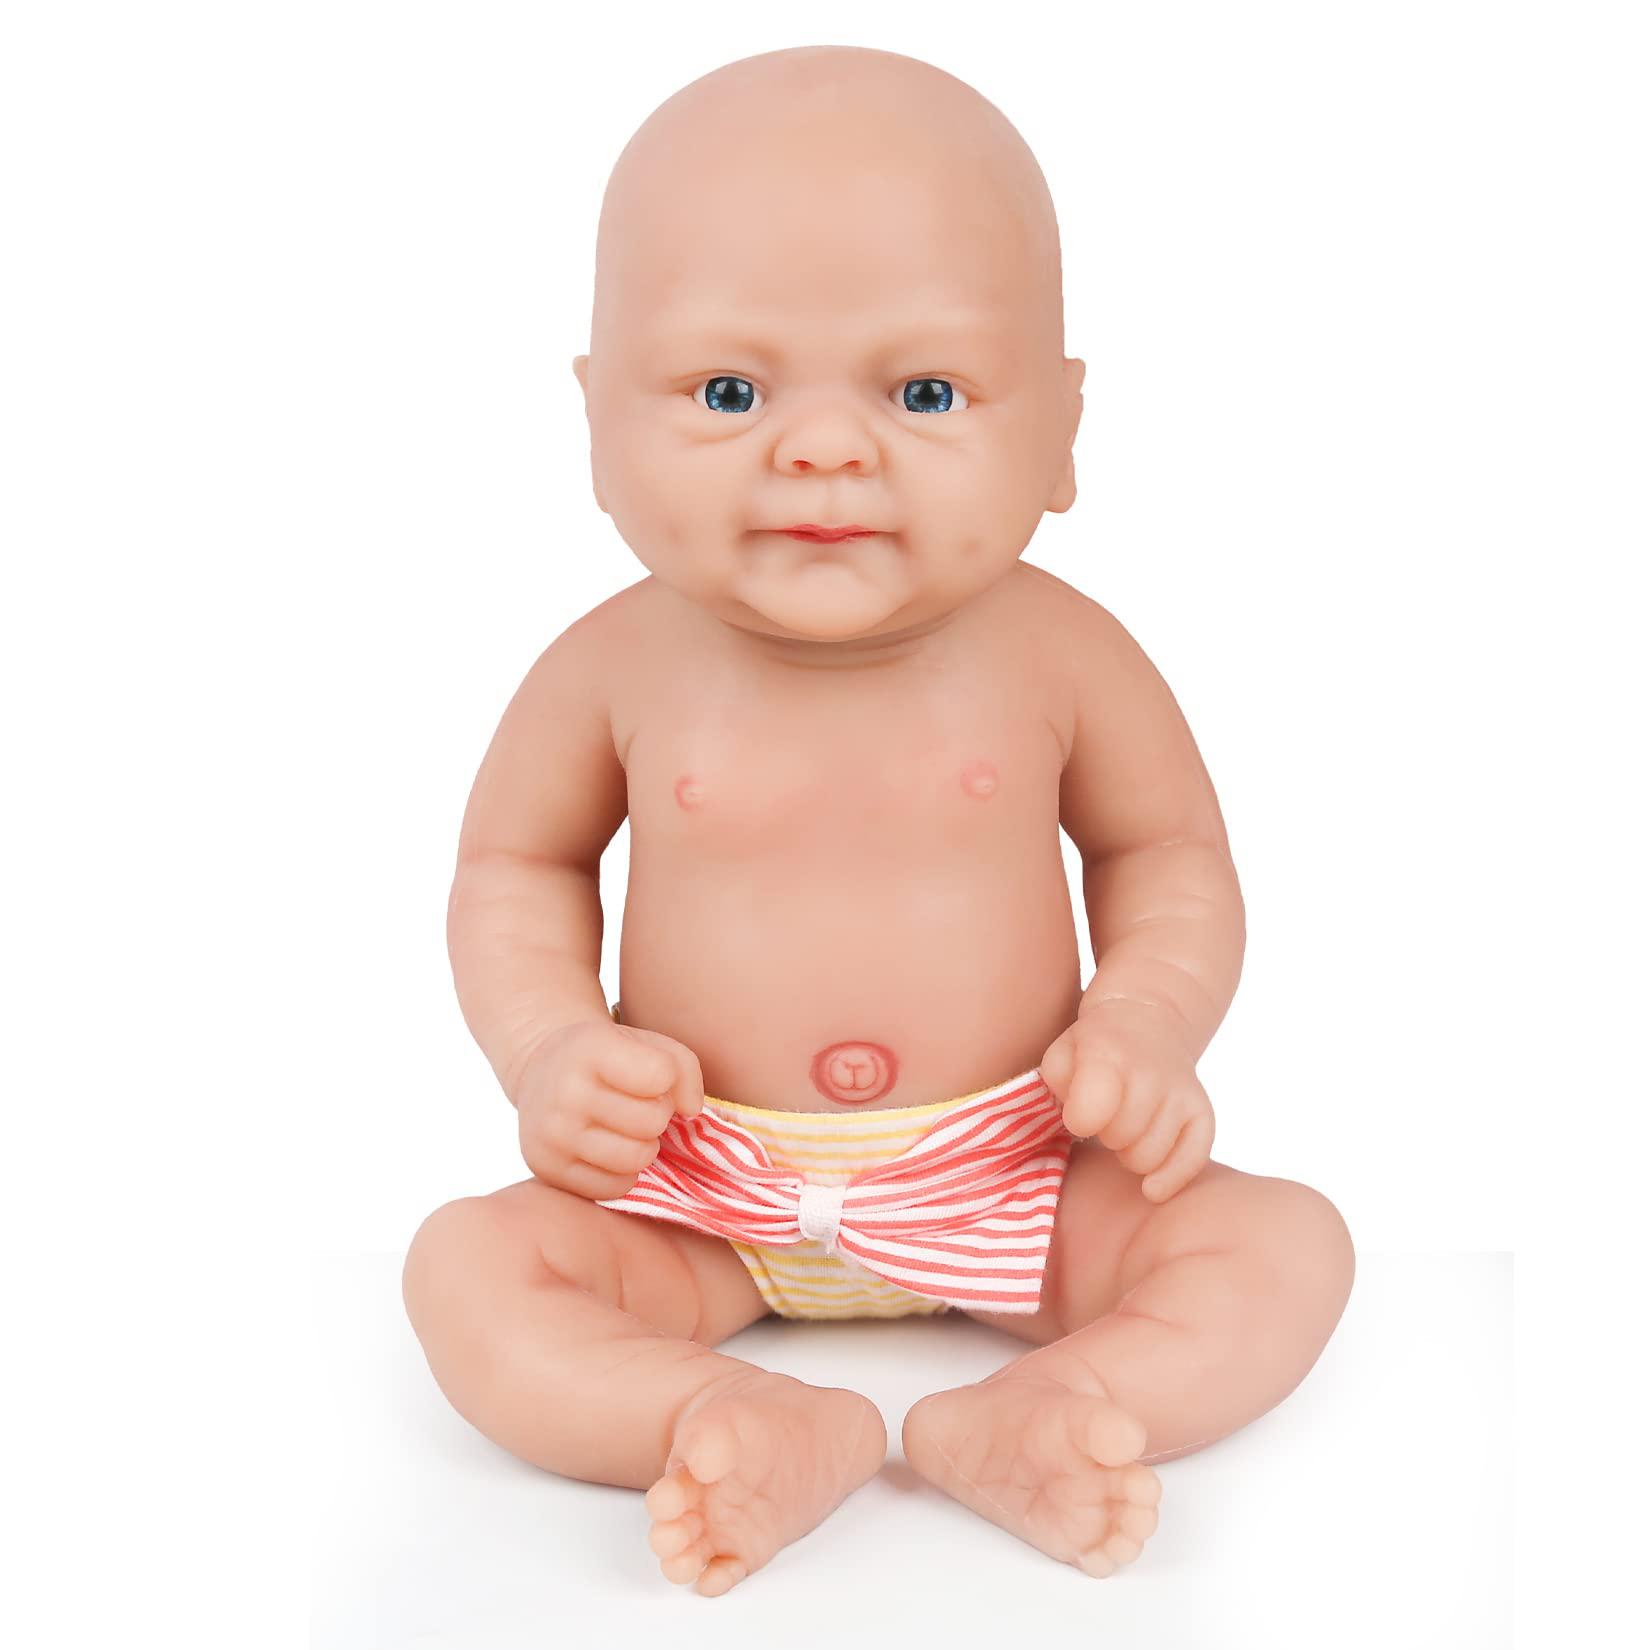 vollence 14 inch full body silicone baby dolls,not vinyl dolls,soft realistic real silicone baby doll bald, lifelike newborn 